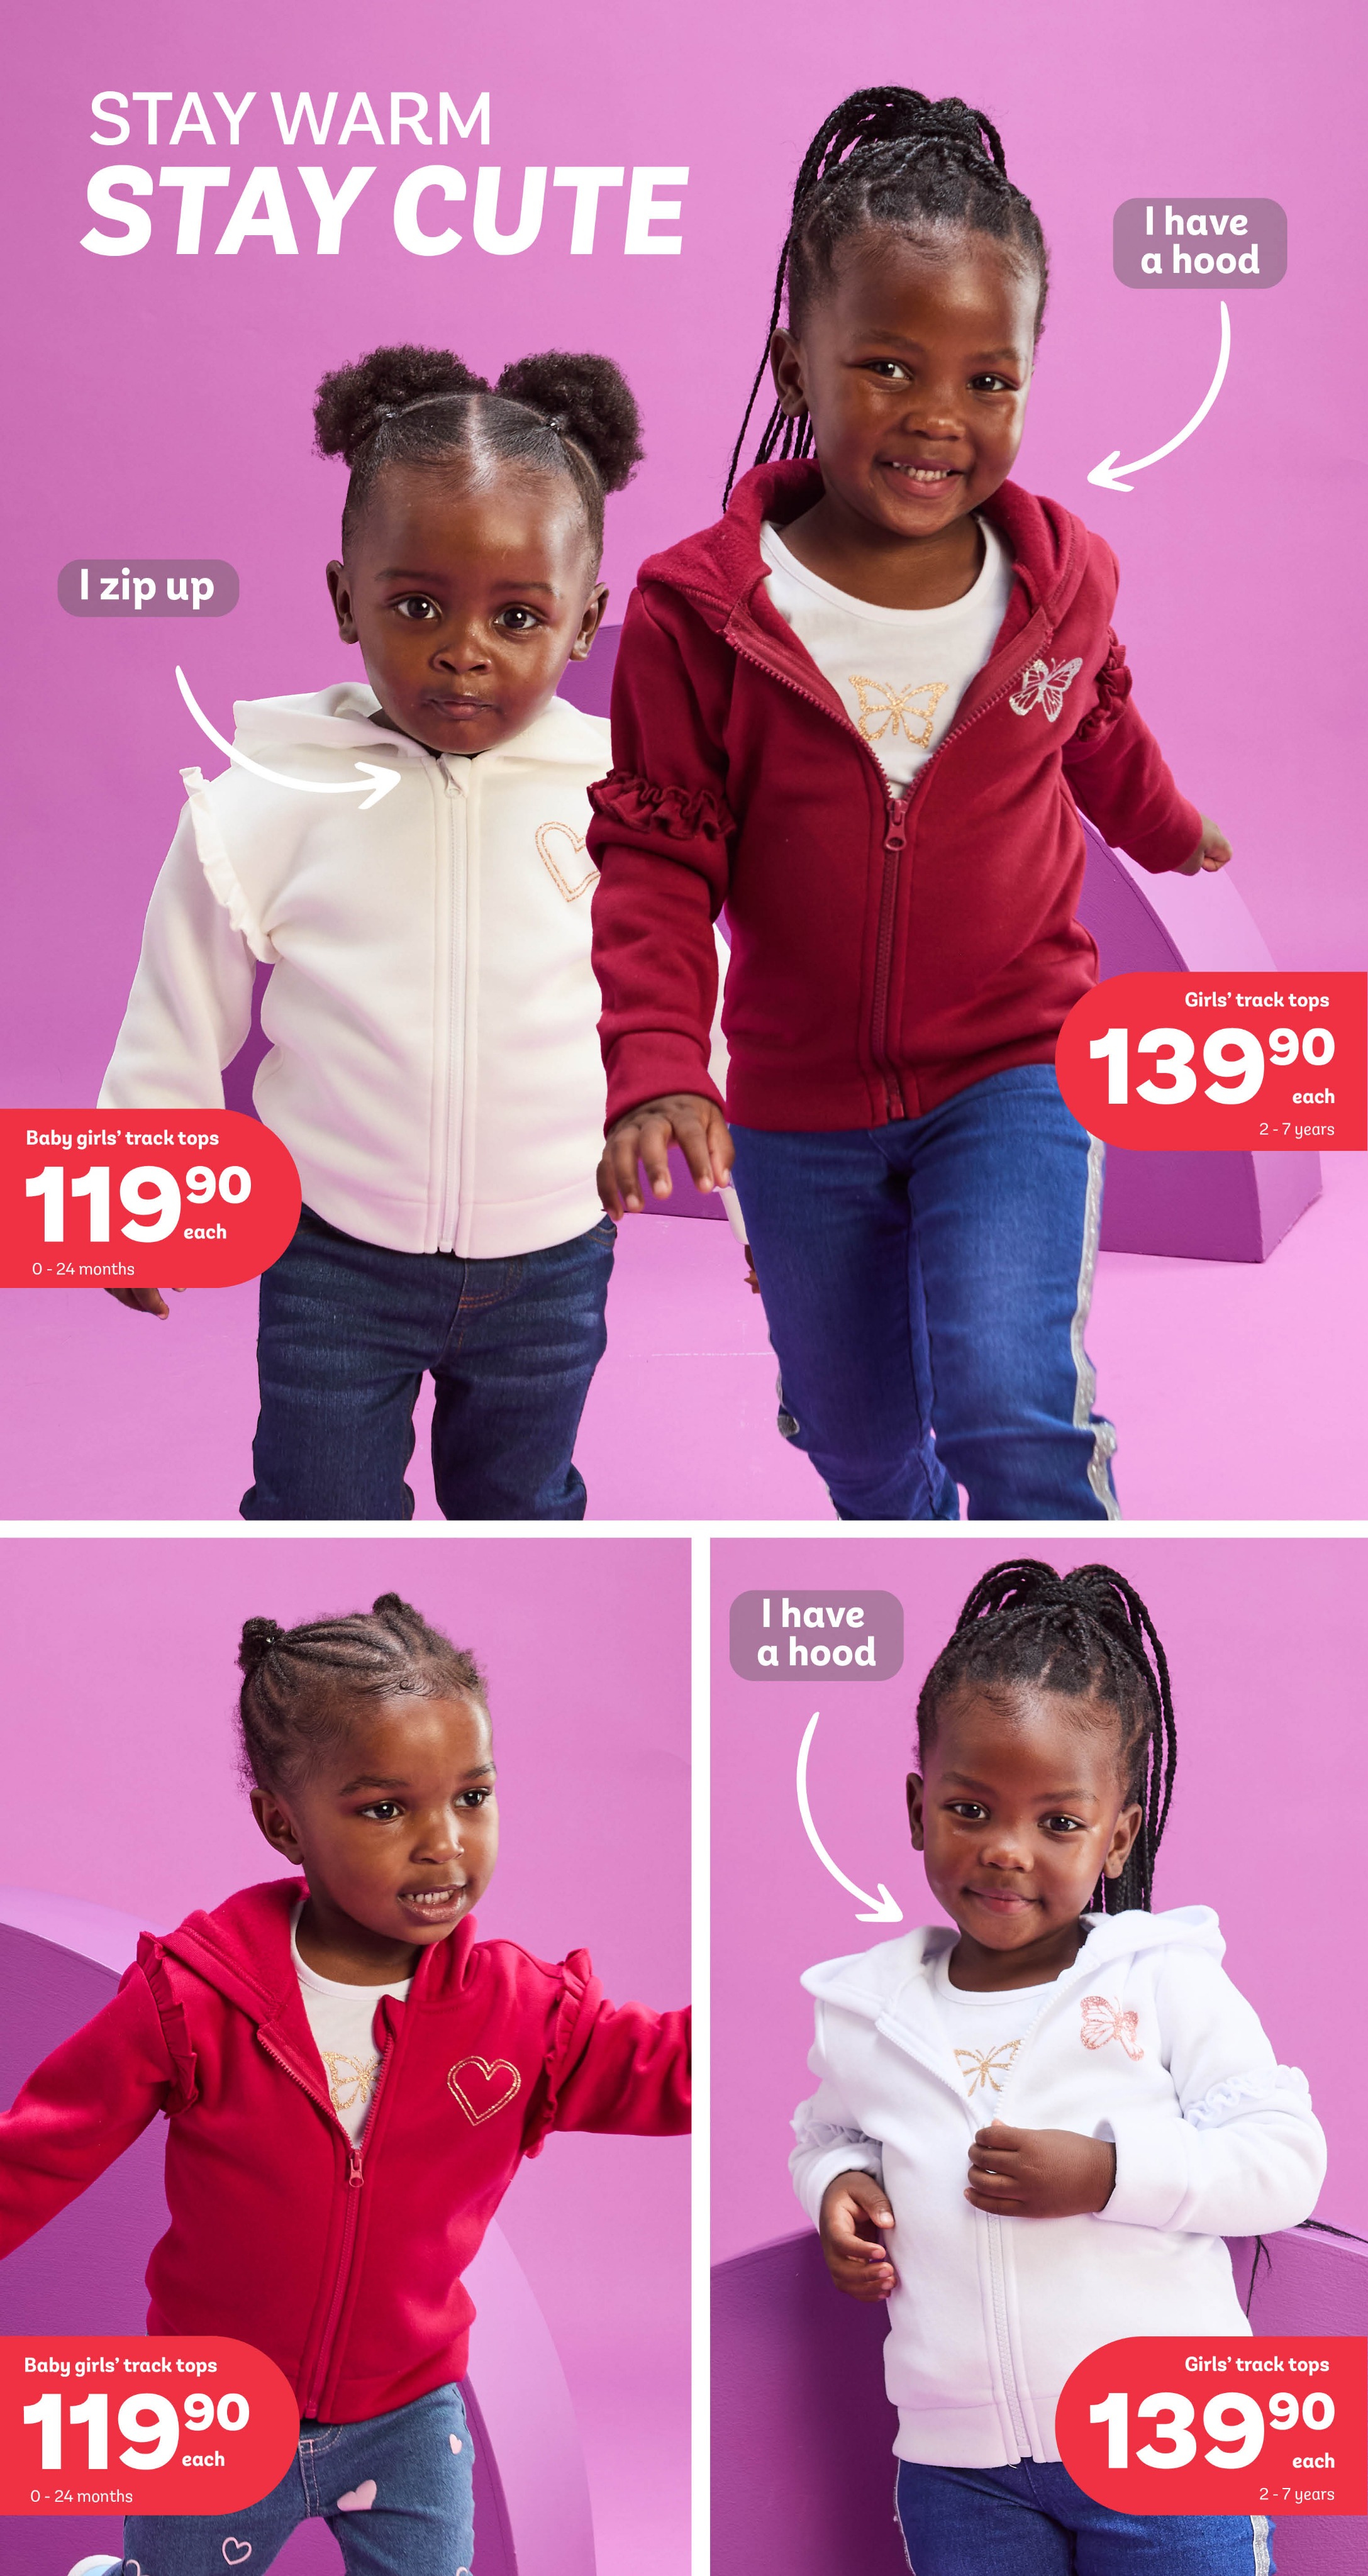 Stay Warm, Stay Cute - NEW Kids’ Track Tops